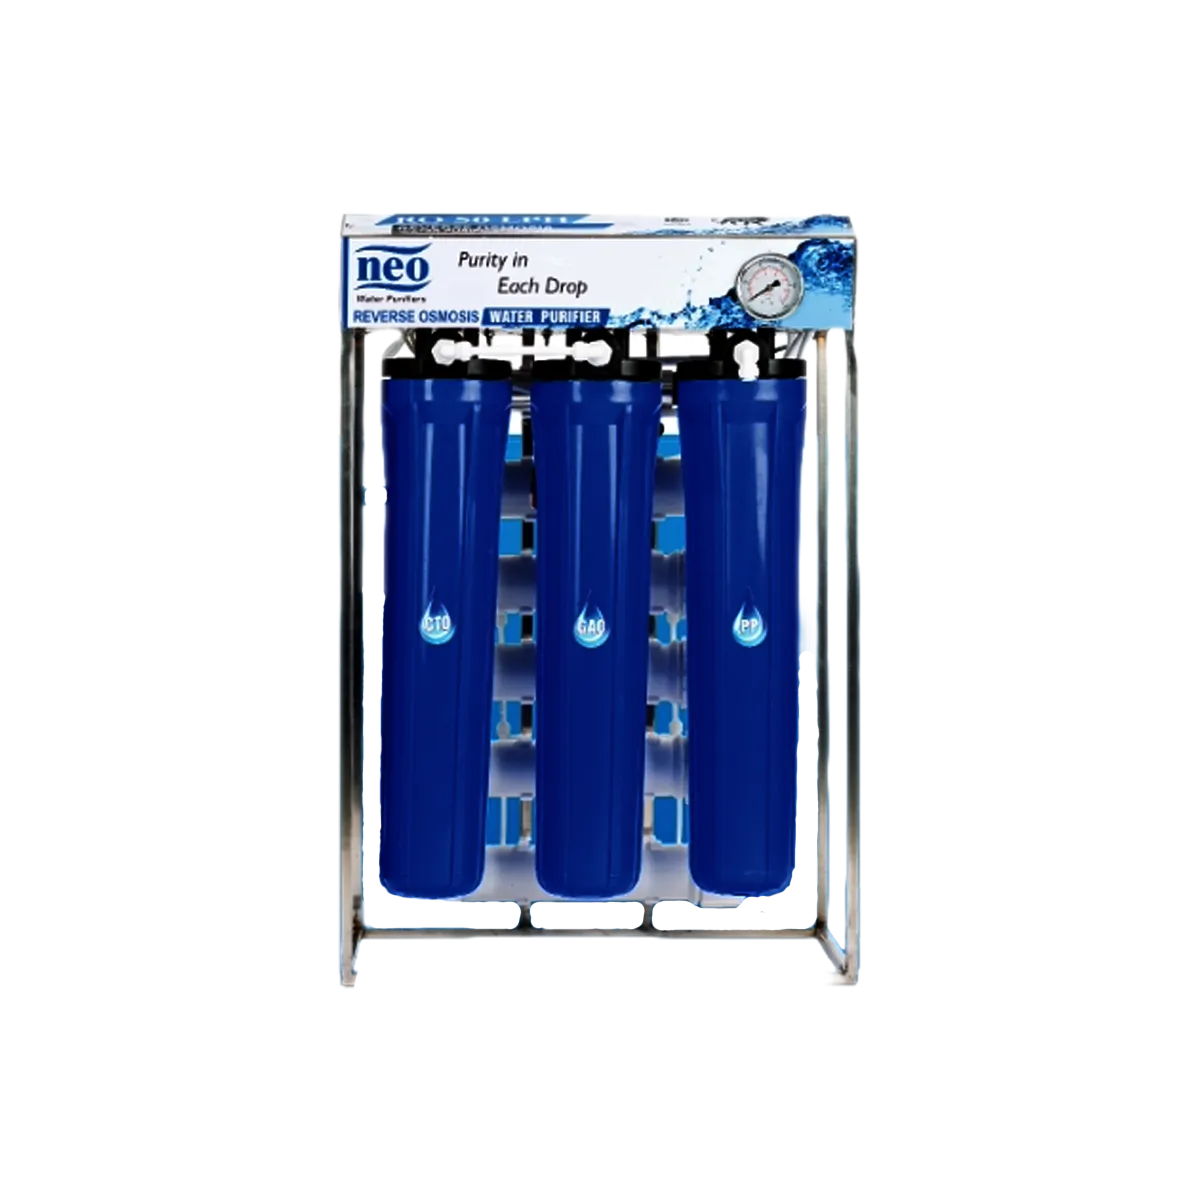 Neo 50 LPH RO + UV Commercial Water Purifier